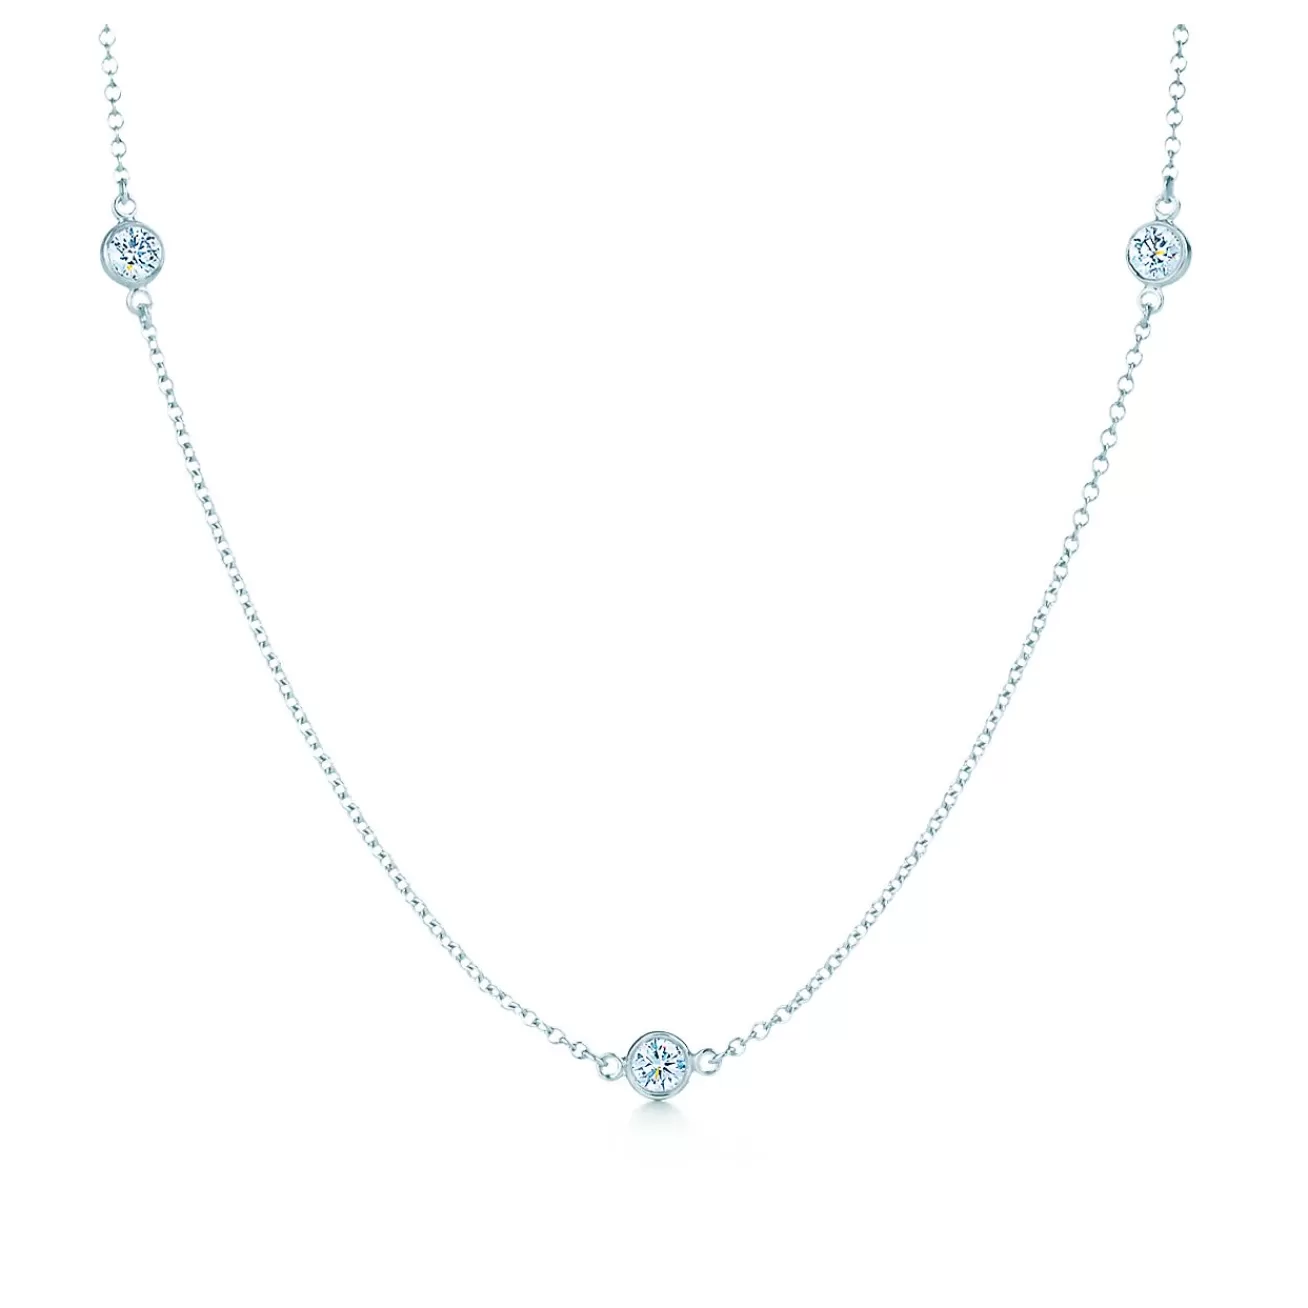 Tiffany & Co. Elsa Peretti® Diamonds by the Yard® necklace in platinum. | ^ Necklaces & Pendants | Platinum Jewelry